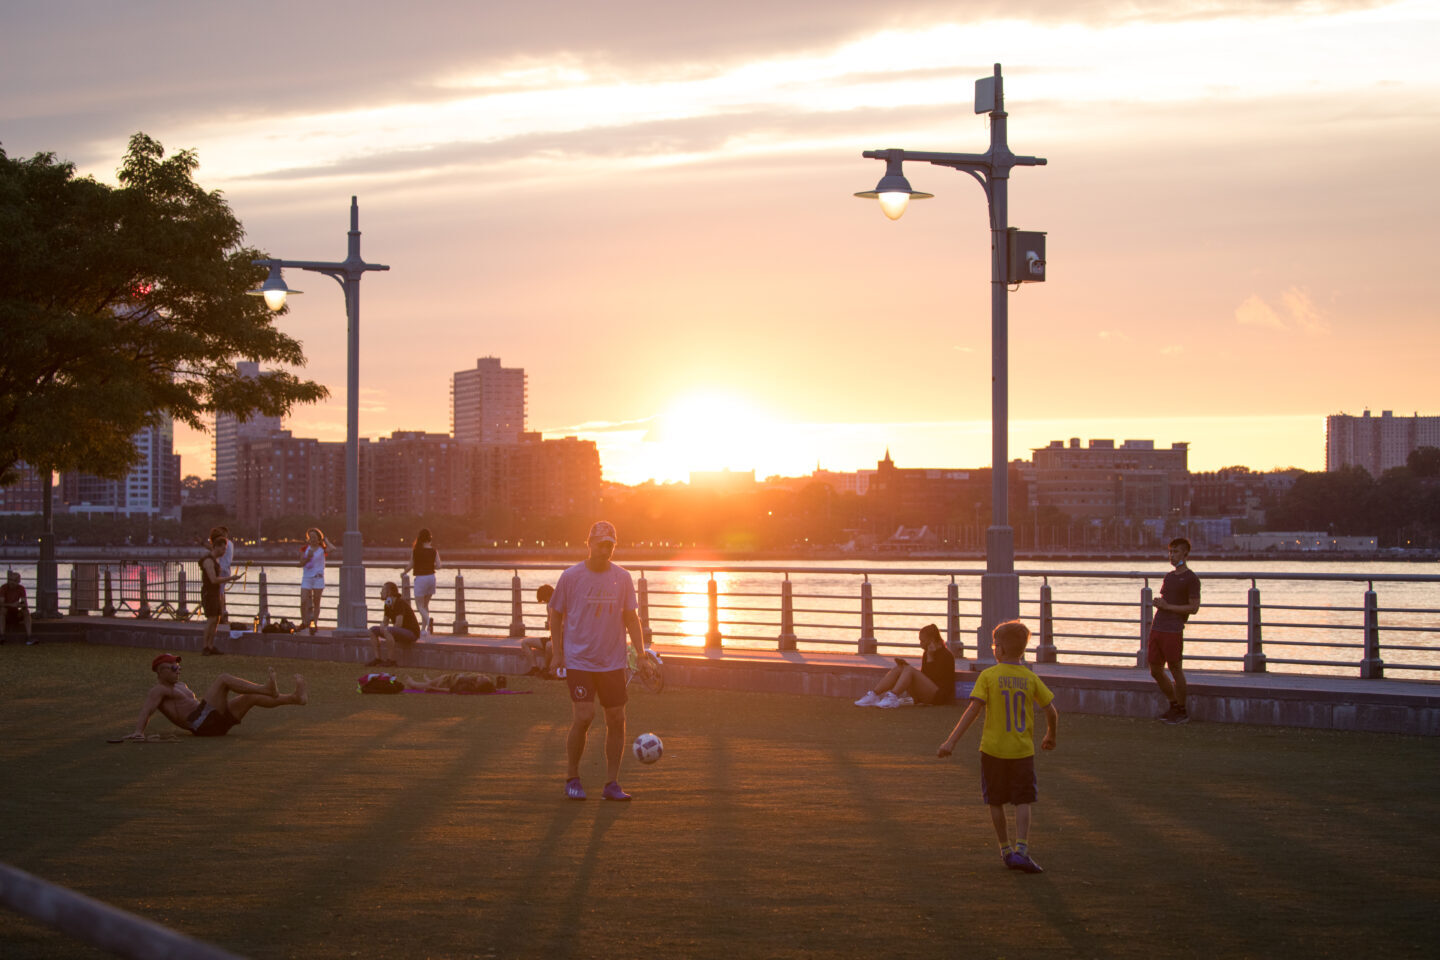 Sunset at Pier 46 as soccer players practice on the field